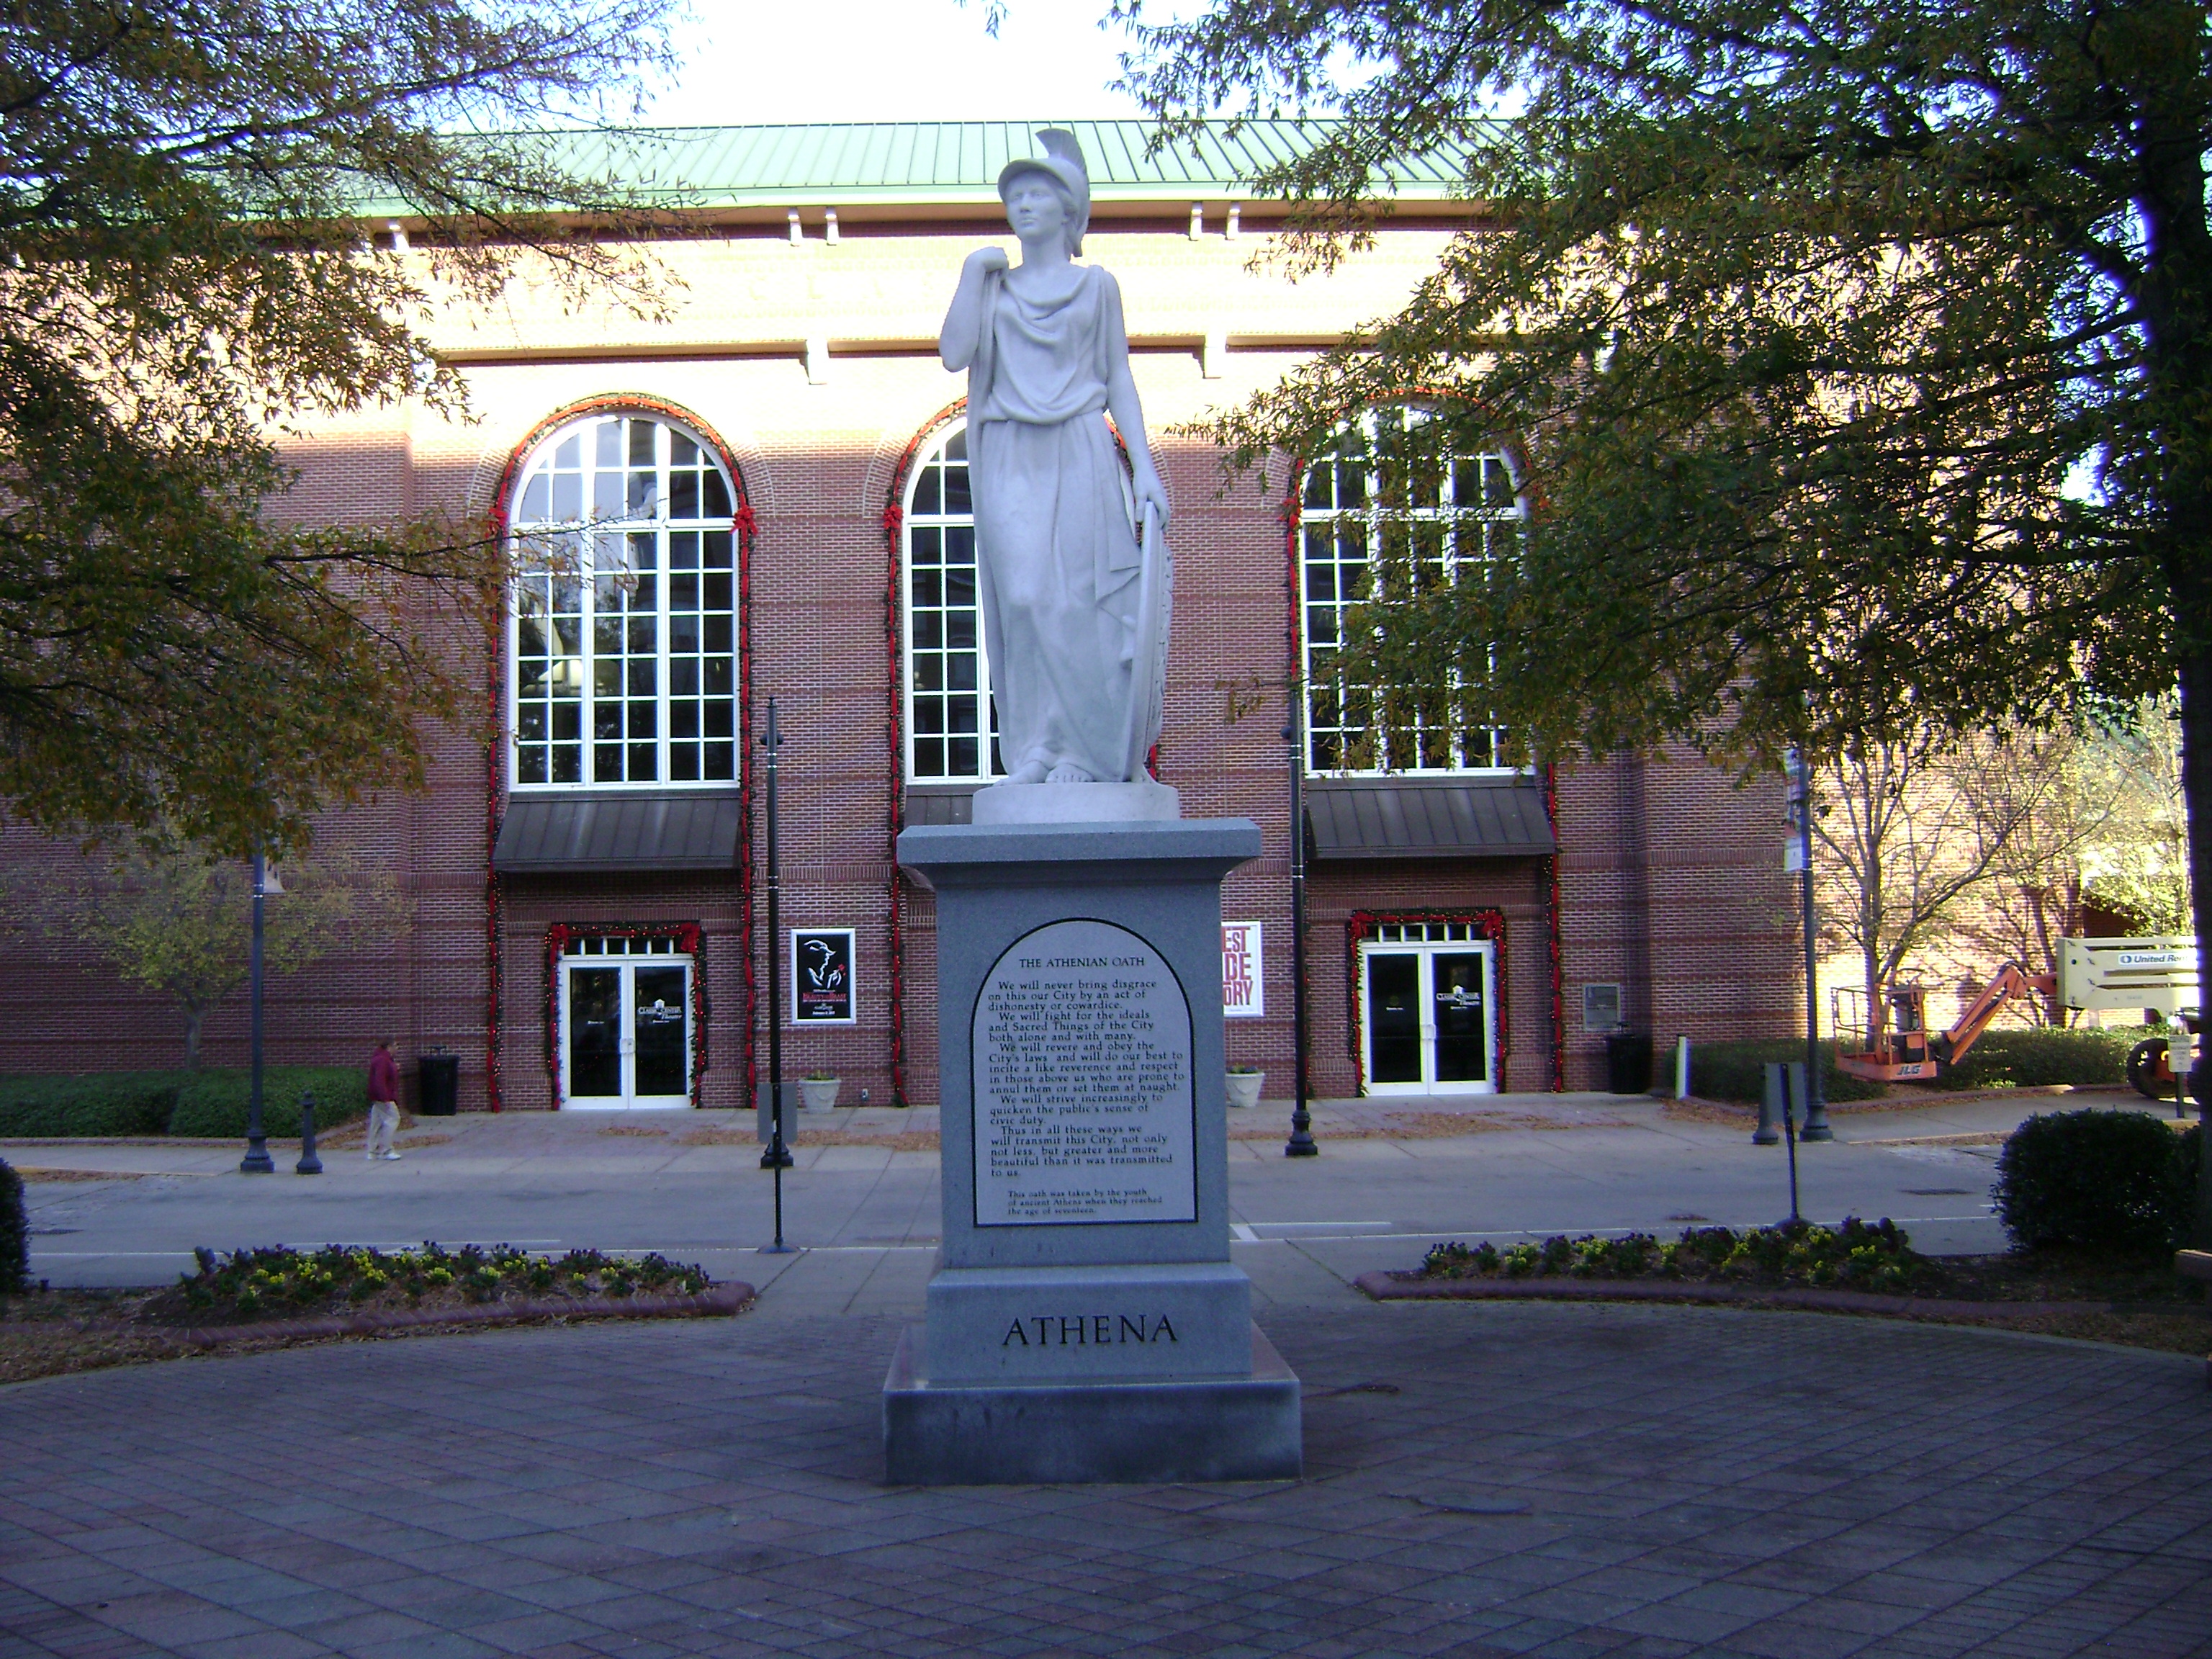 Athena Statue in front of Classic Center in Athena, Georgia.